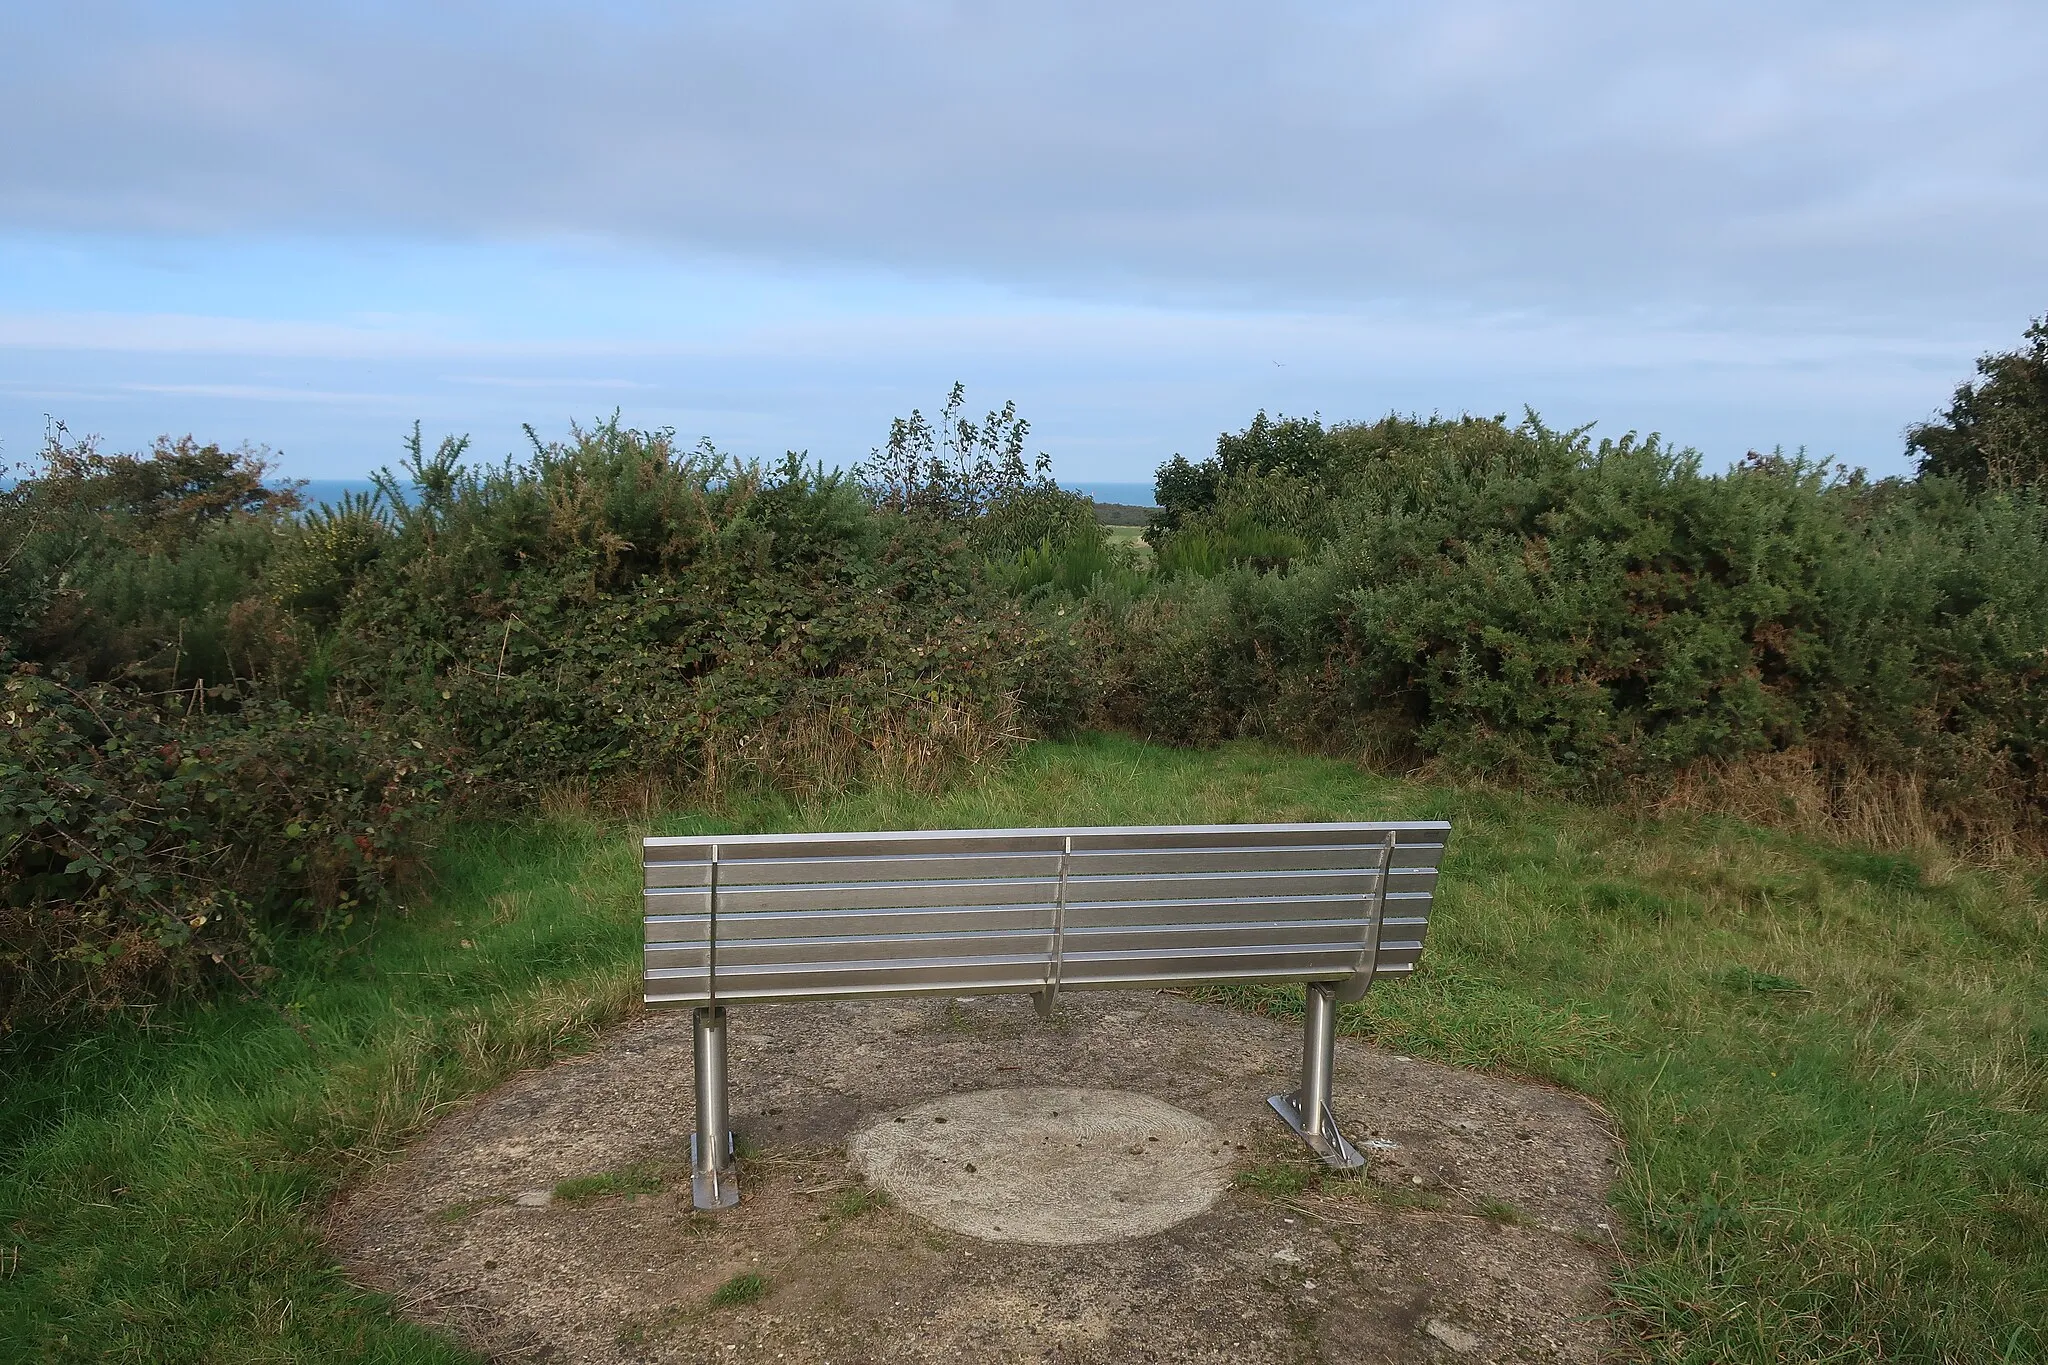 Photo showing: Bench at the crown of Franklin Hill the town of Sheringham, Norfolk, England.